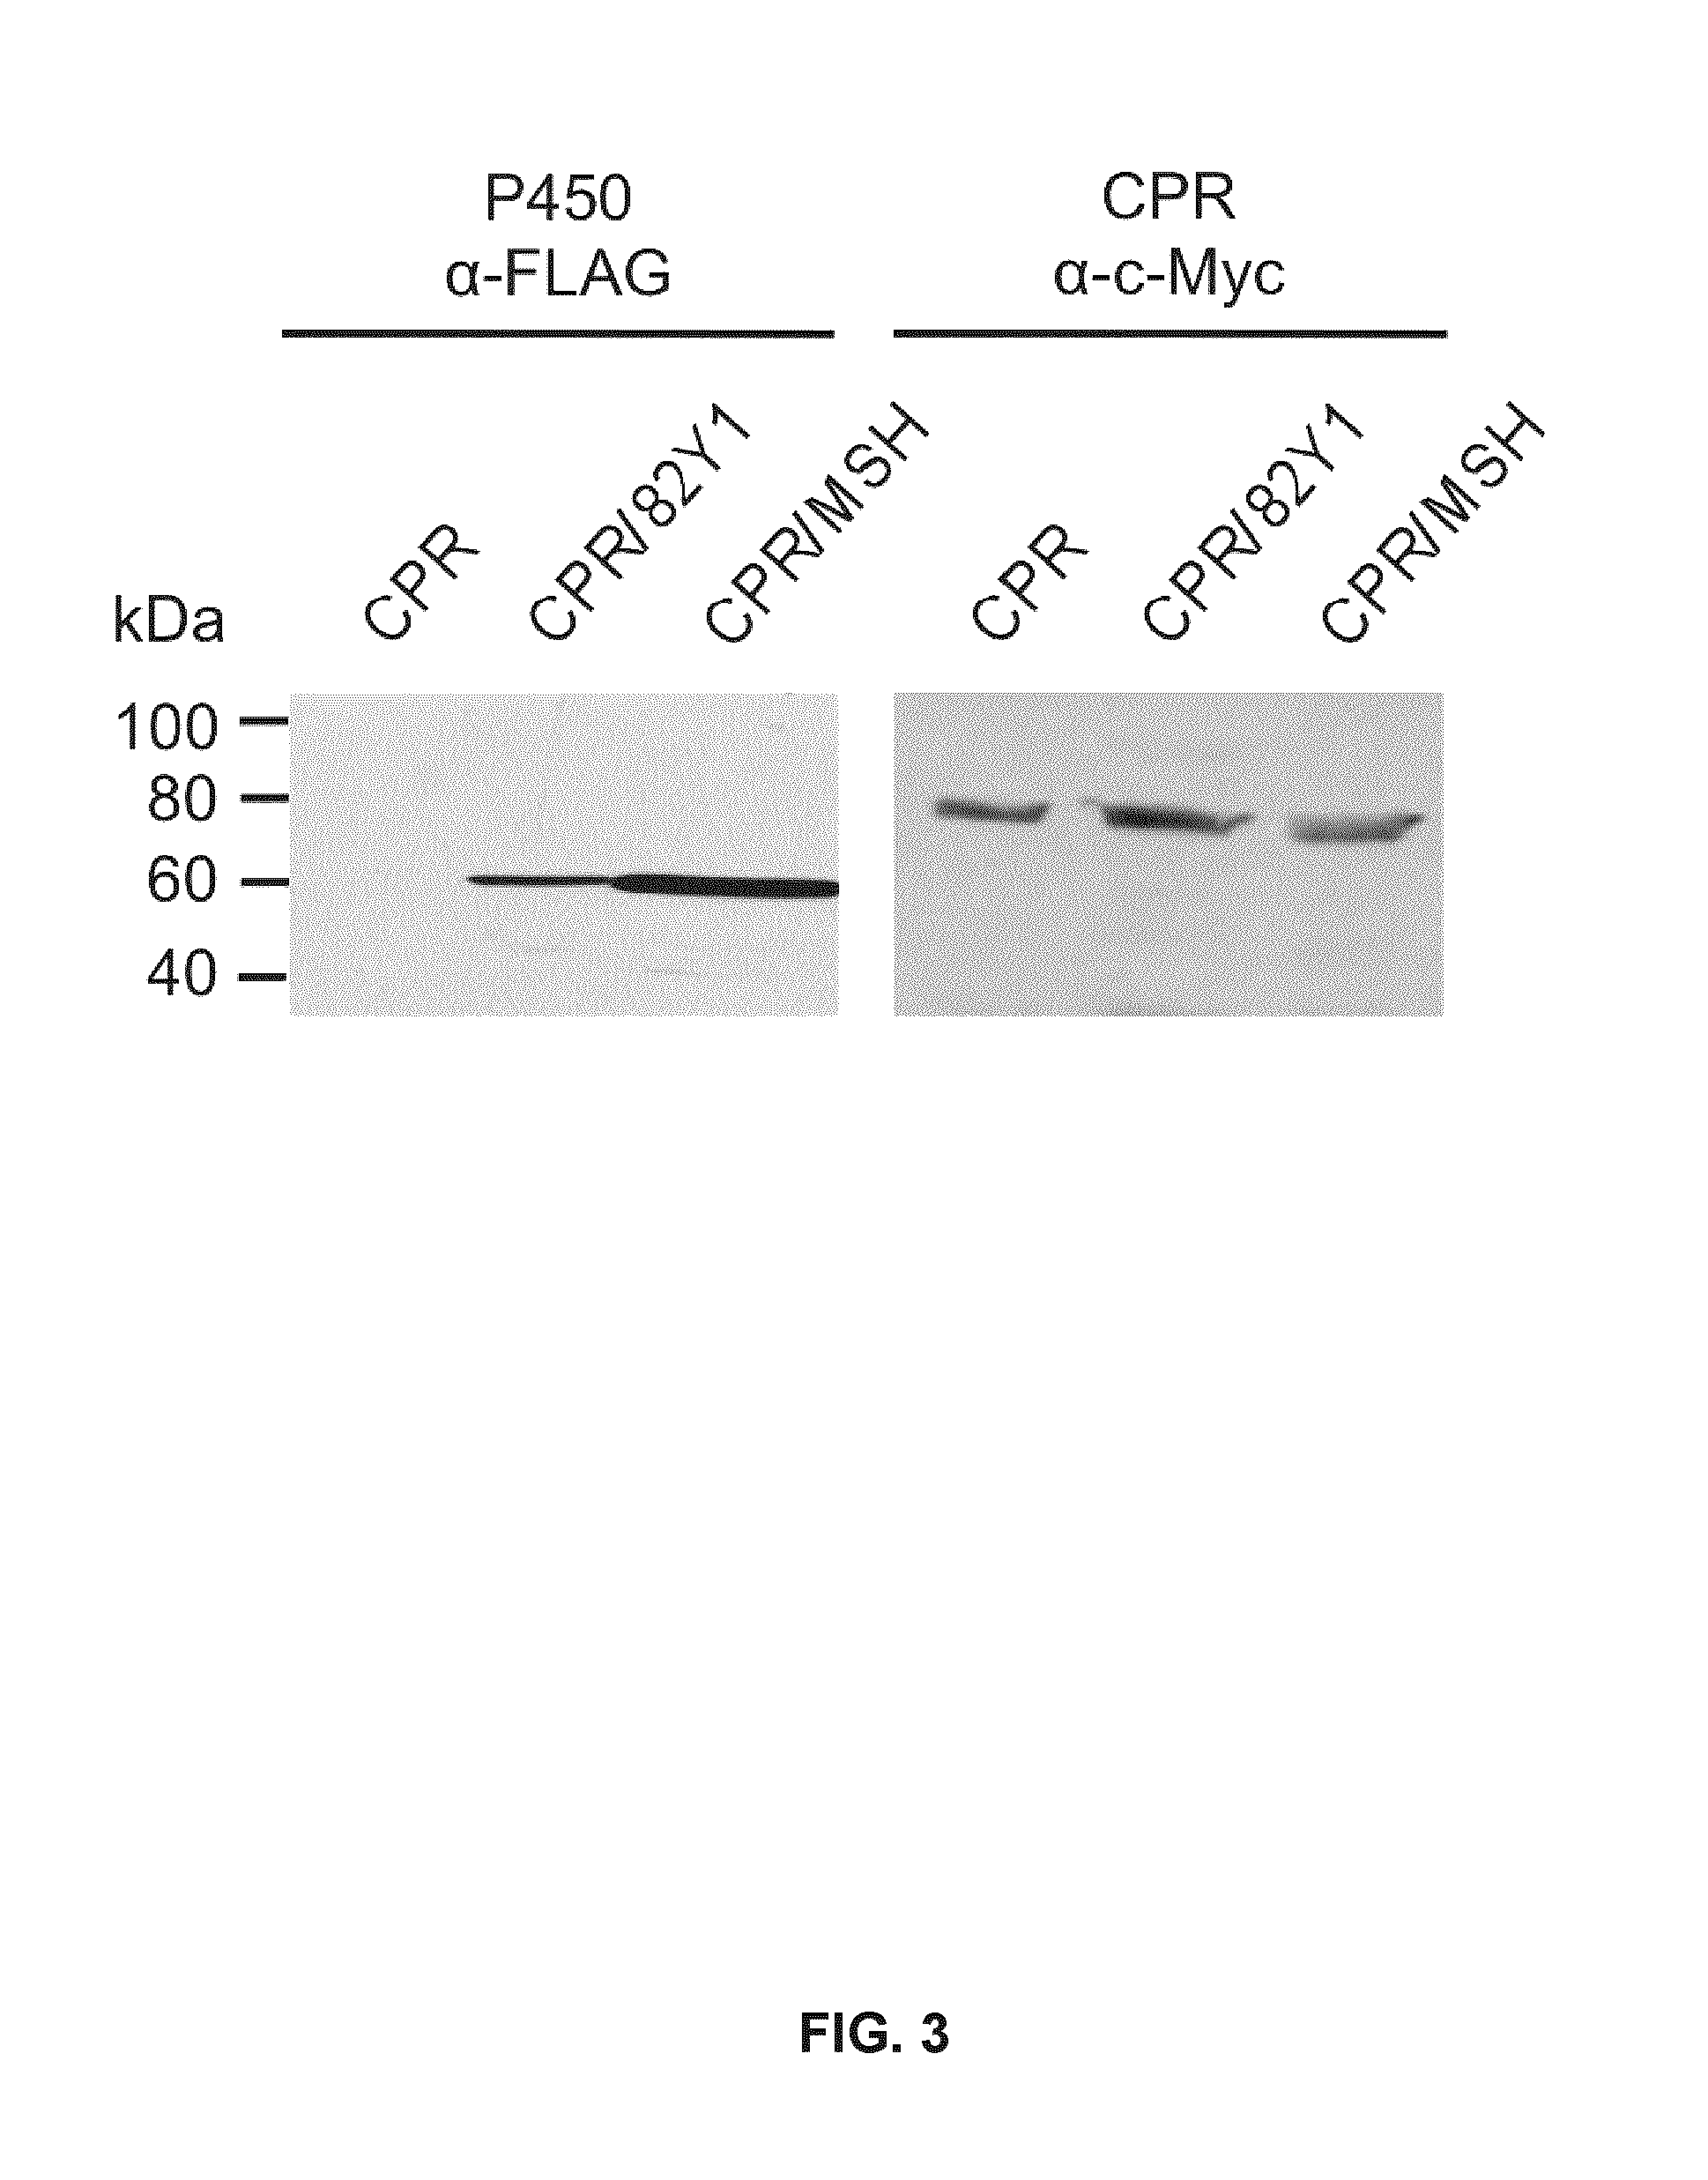 Compositions and methods for making noscapine and synthesis intermediates thereof